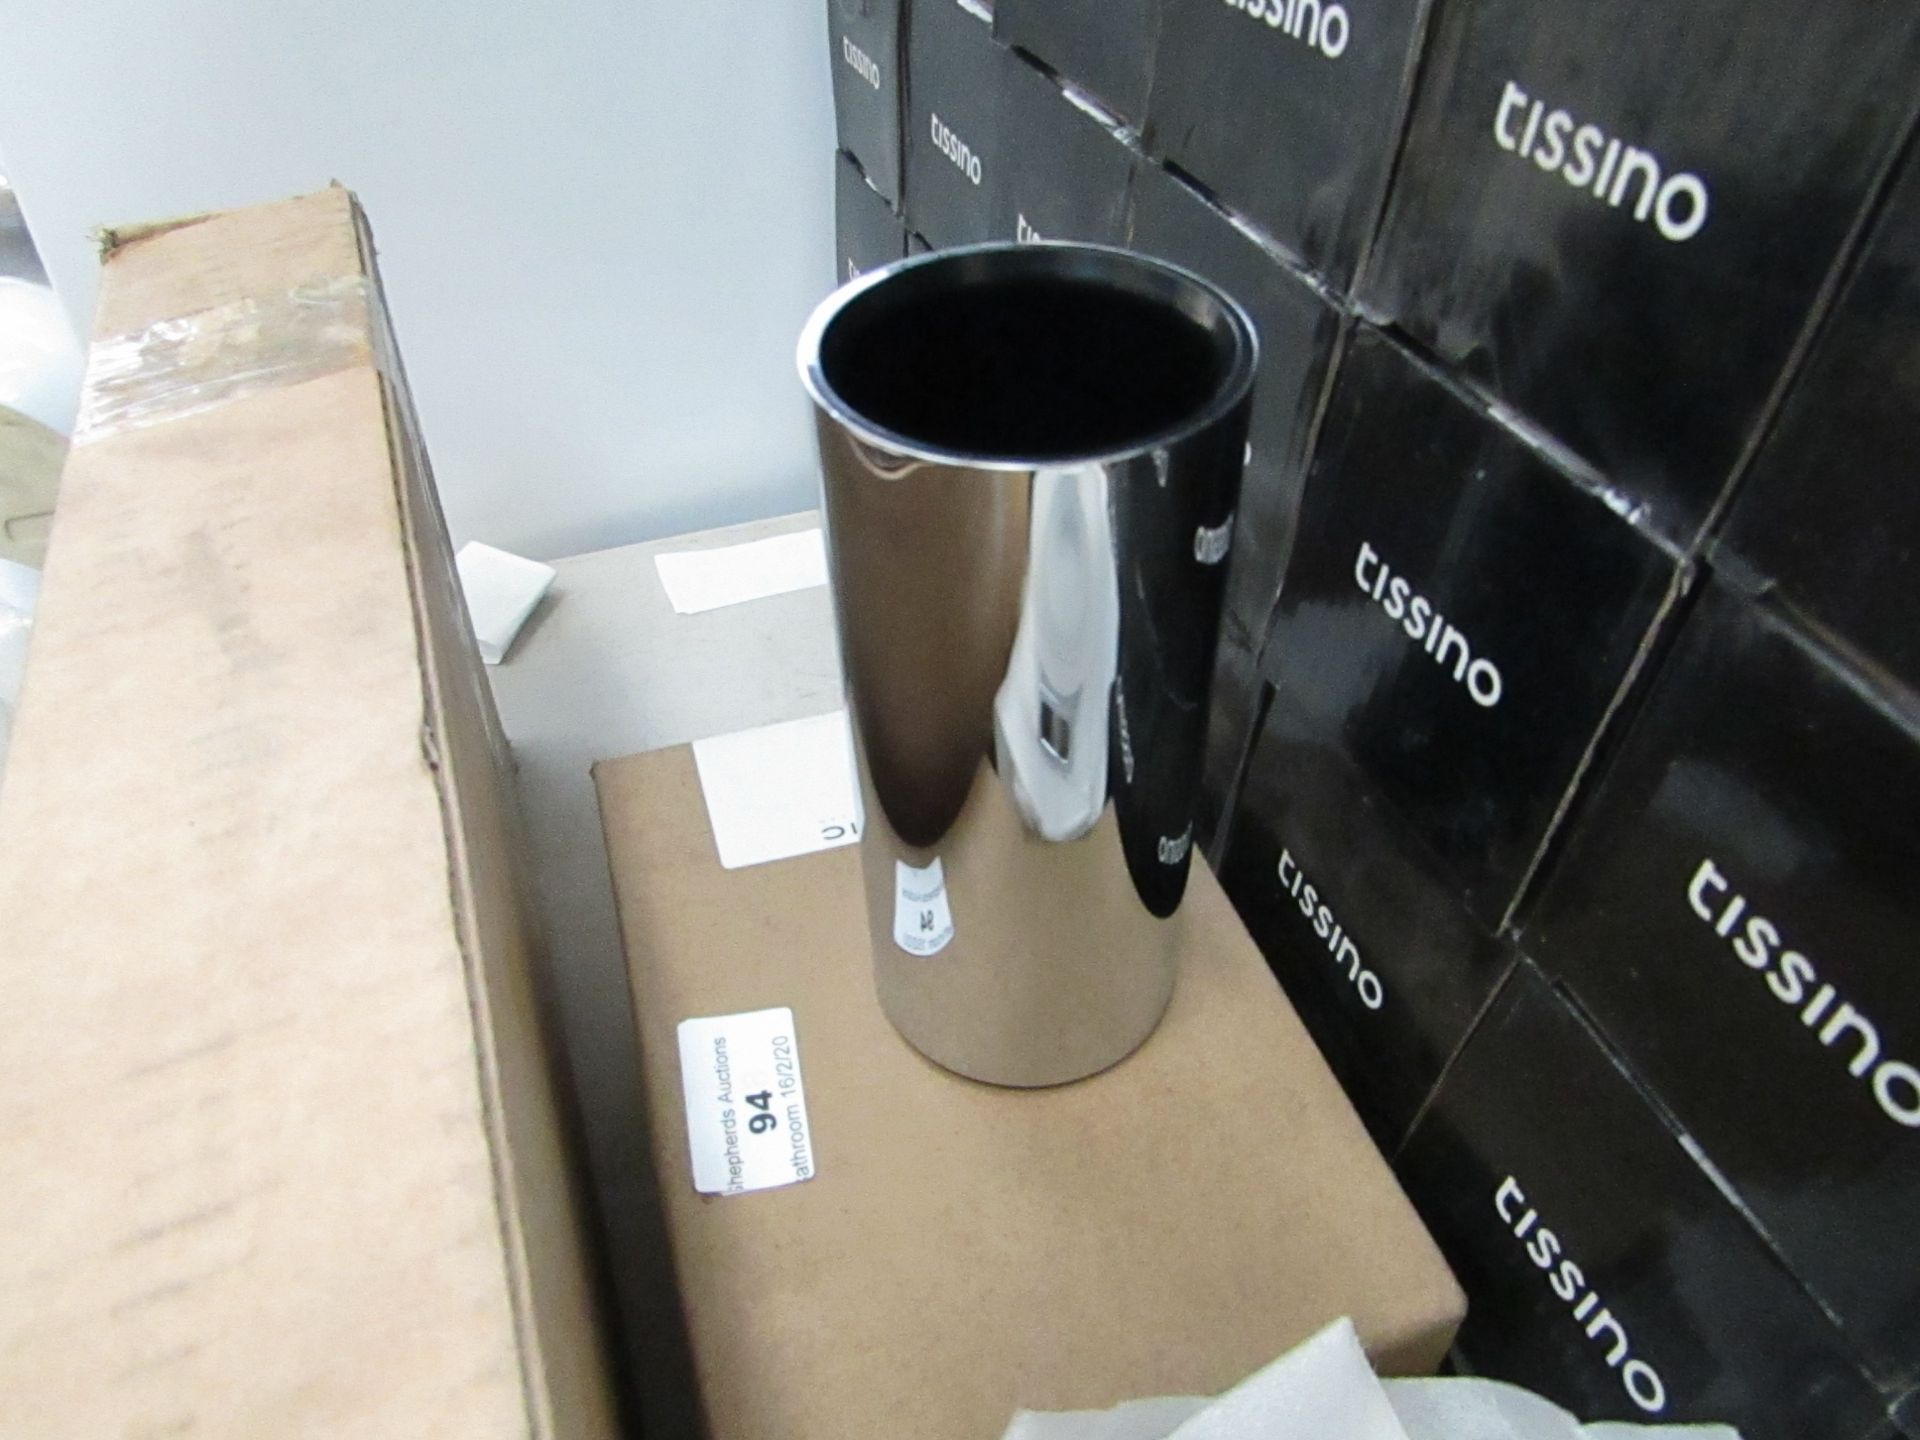 Cosmic stainless steel brush holder, new and boxed.